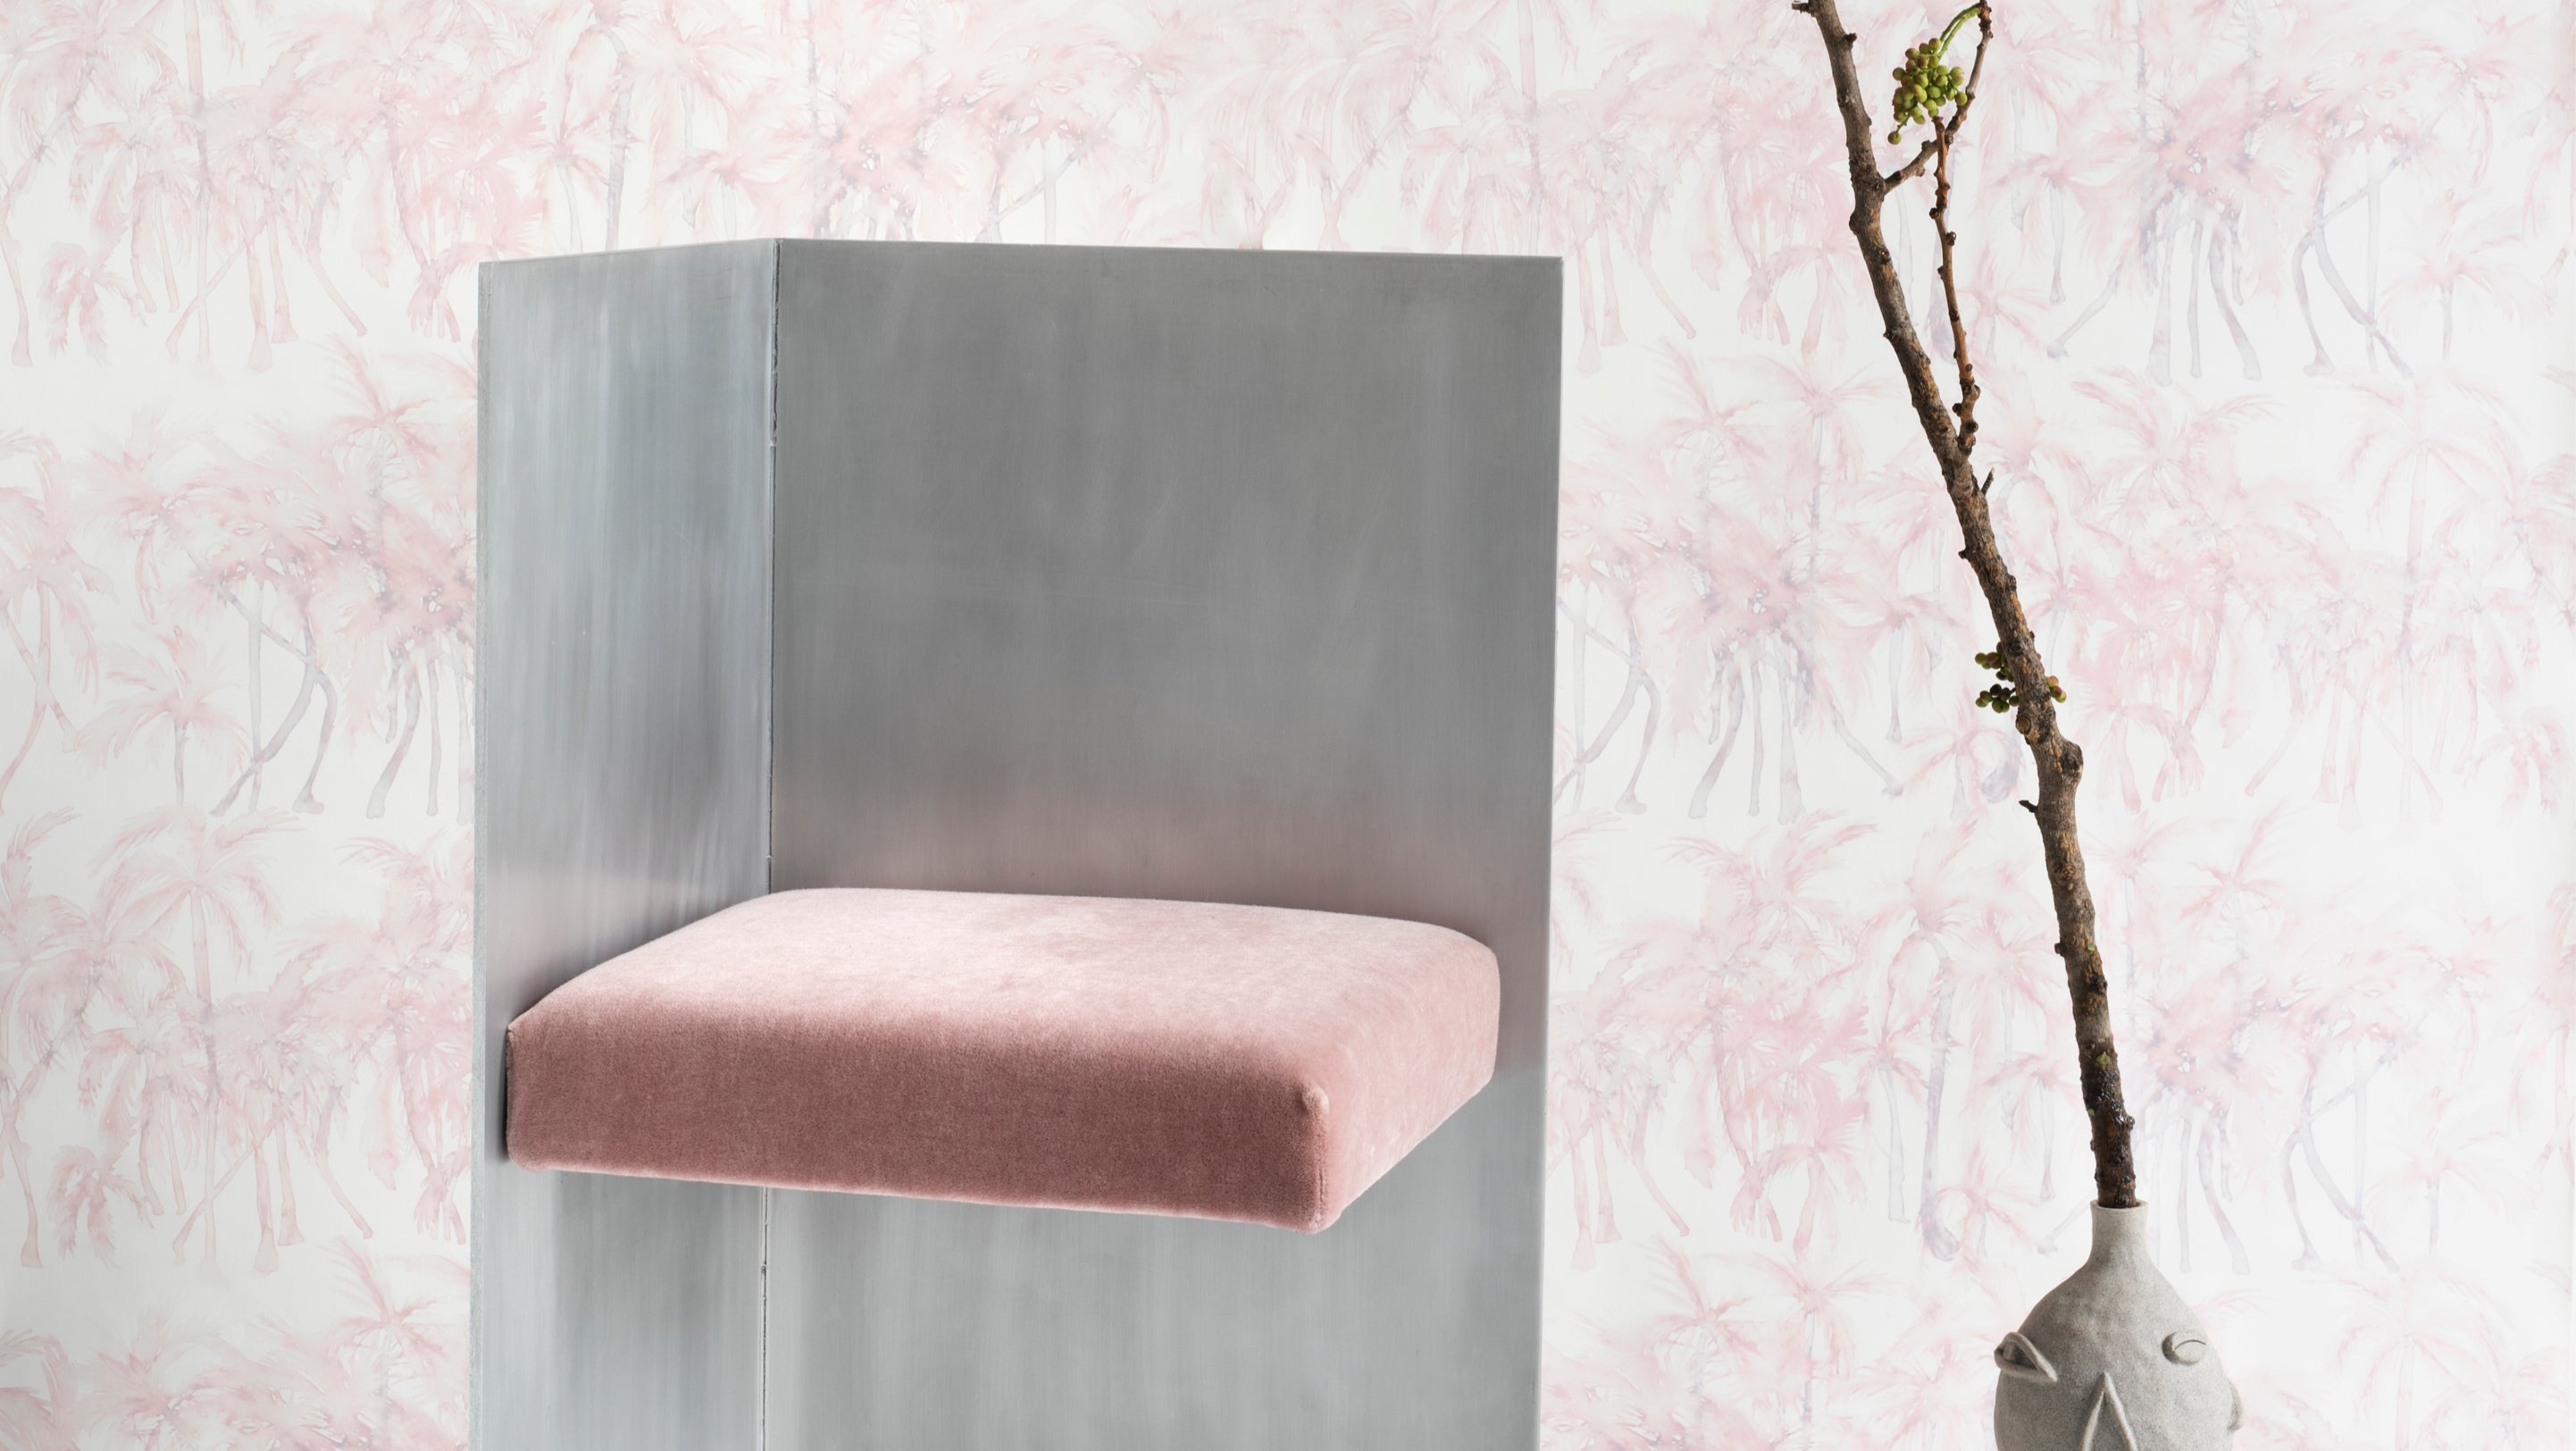 A chair with a pink cushion in front of a wall